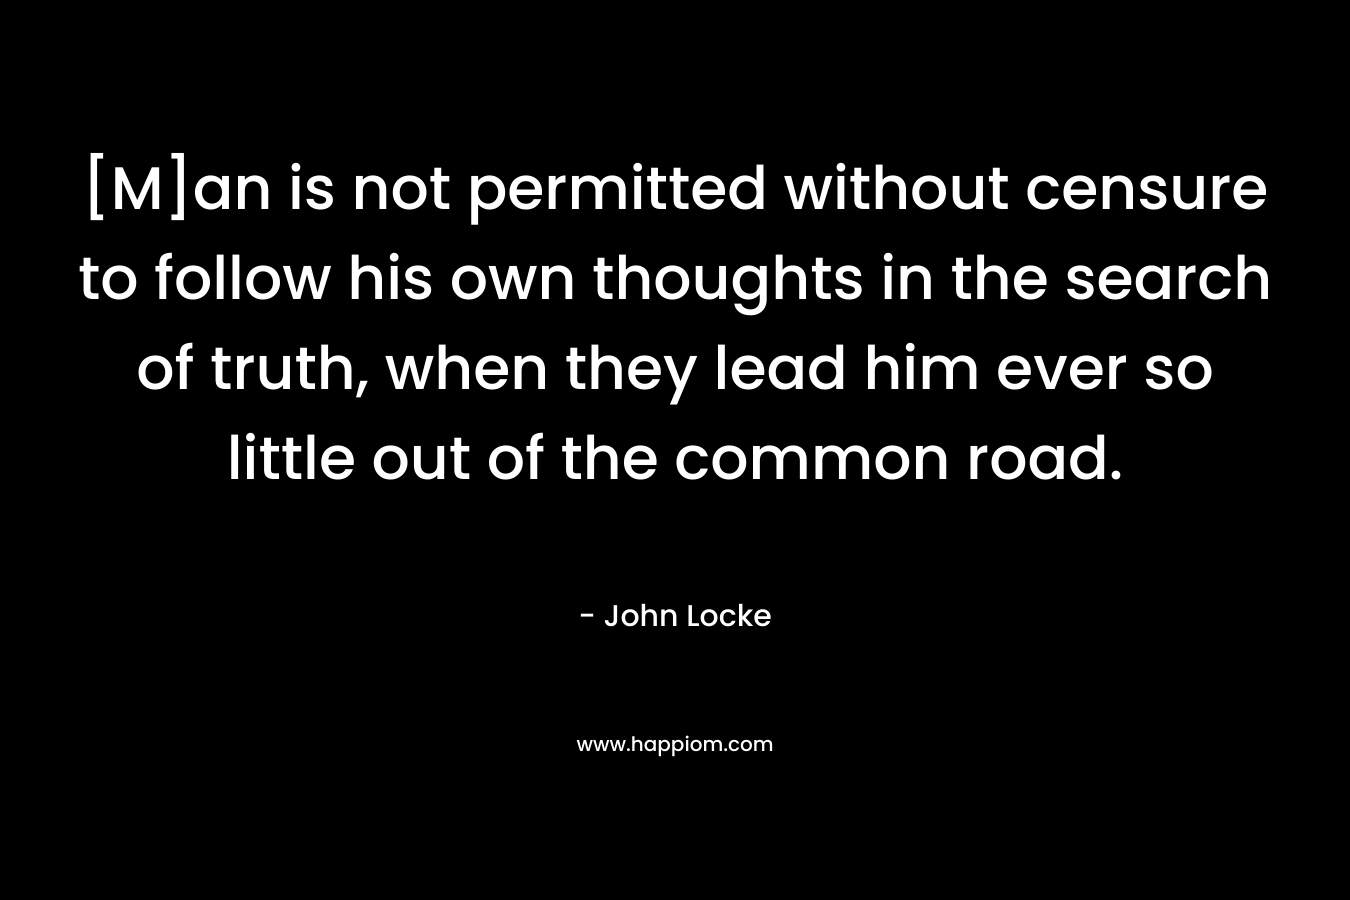 [M]an is not permitted without censure to follow his own thoughts in the search of truth, when they lead him ever so little out of the common road. – John Locke